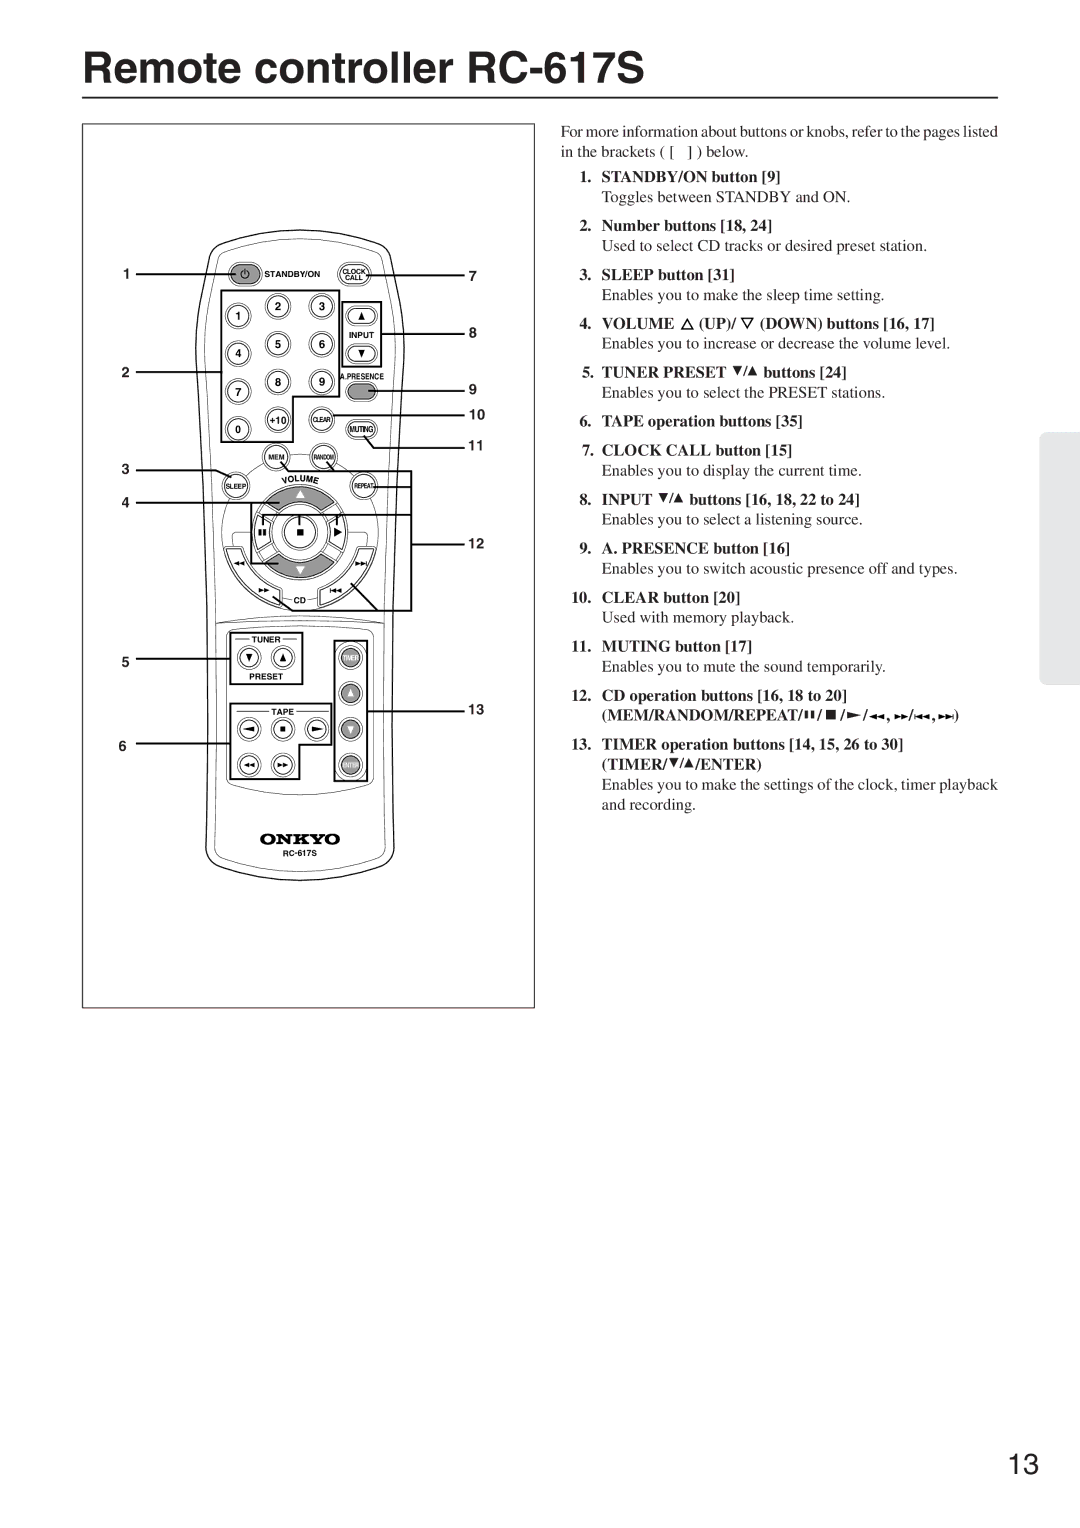 Onkyo CR-305FX instruction manual Remote controller RC-617S 